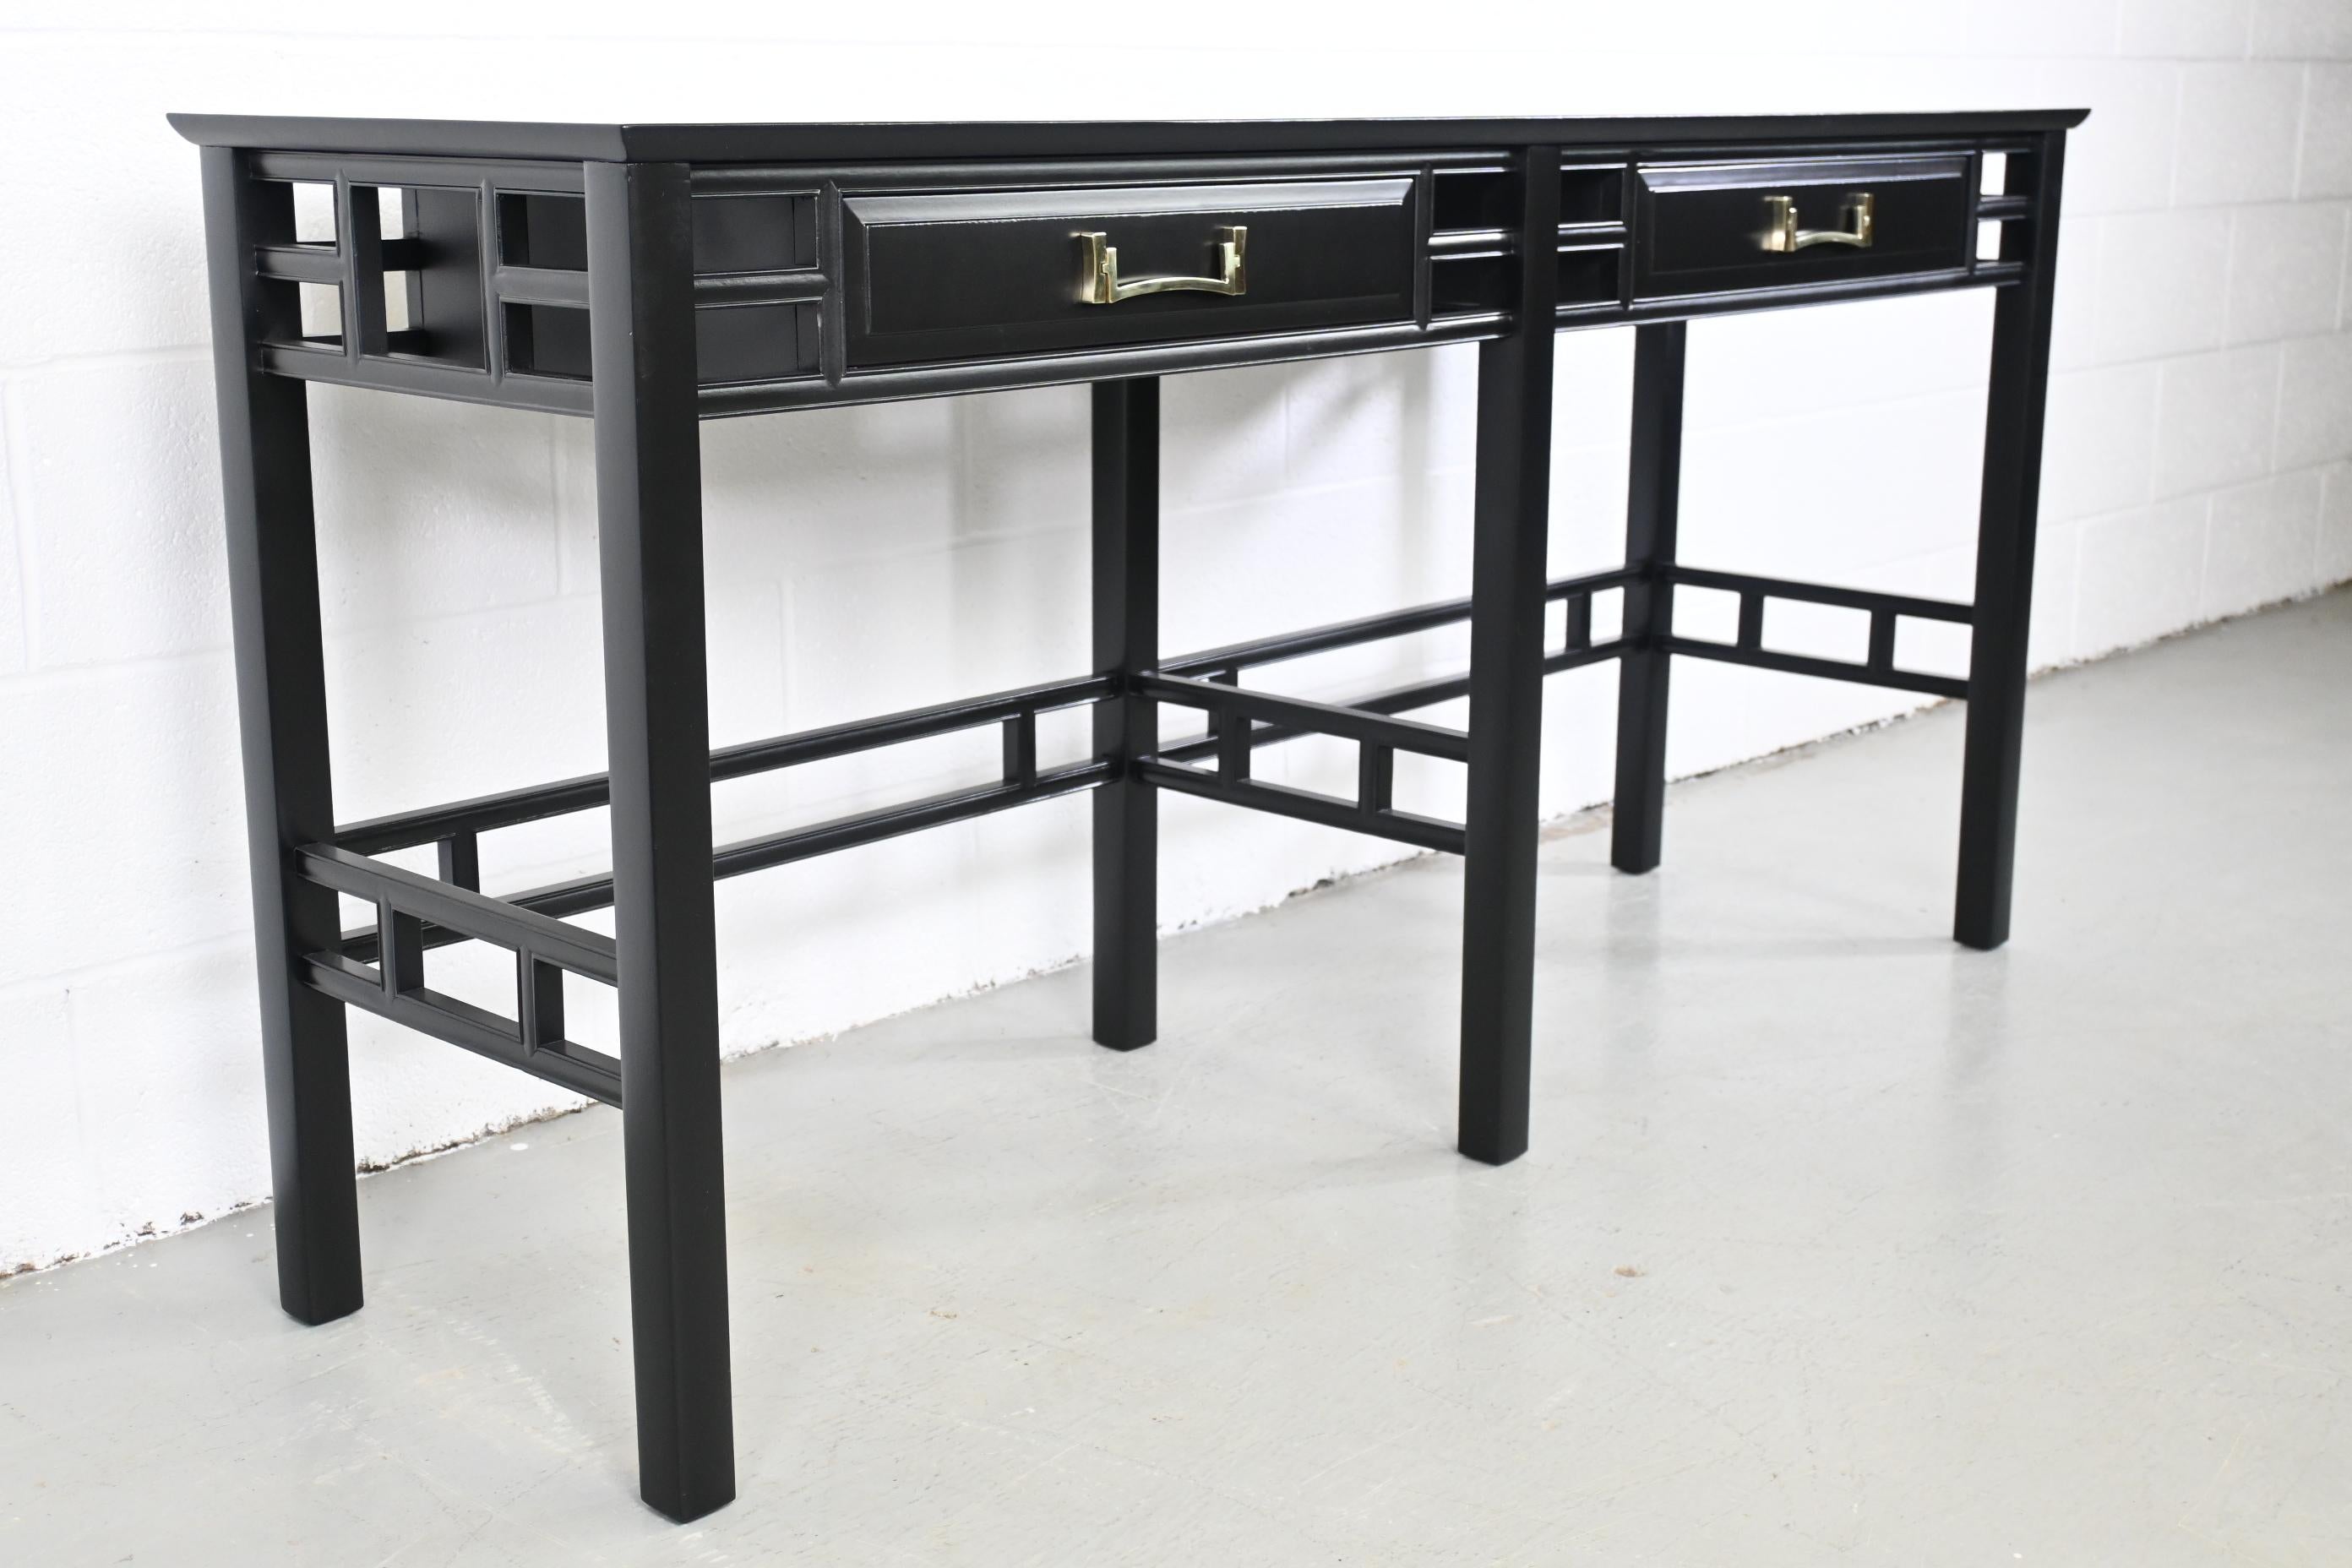 Henredon furniture black lacquered console or sofa table with two drawers

Heritage Henredon, USA, 1950s

Measures: 62 Wide x 17.88 Deep x 30.25 High

Black lacquered lattice contemporary style console table with two drawers and brass